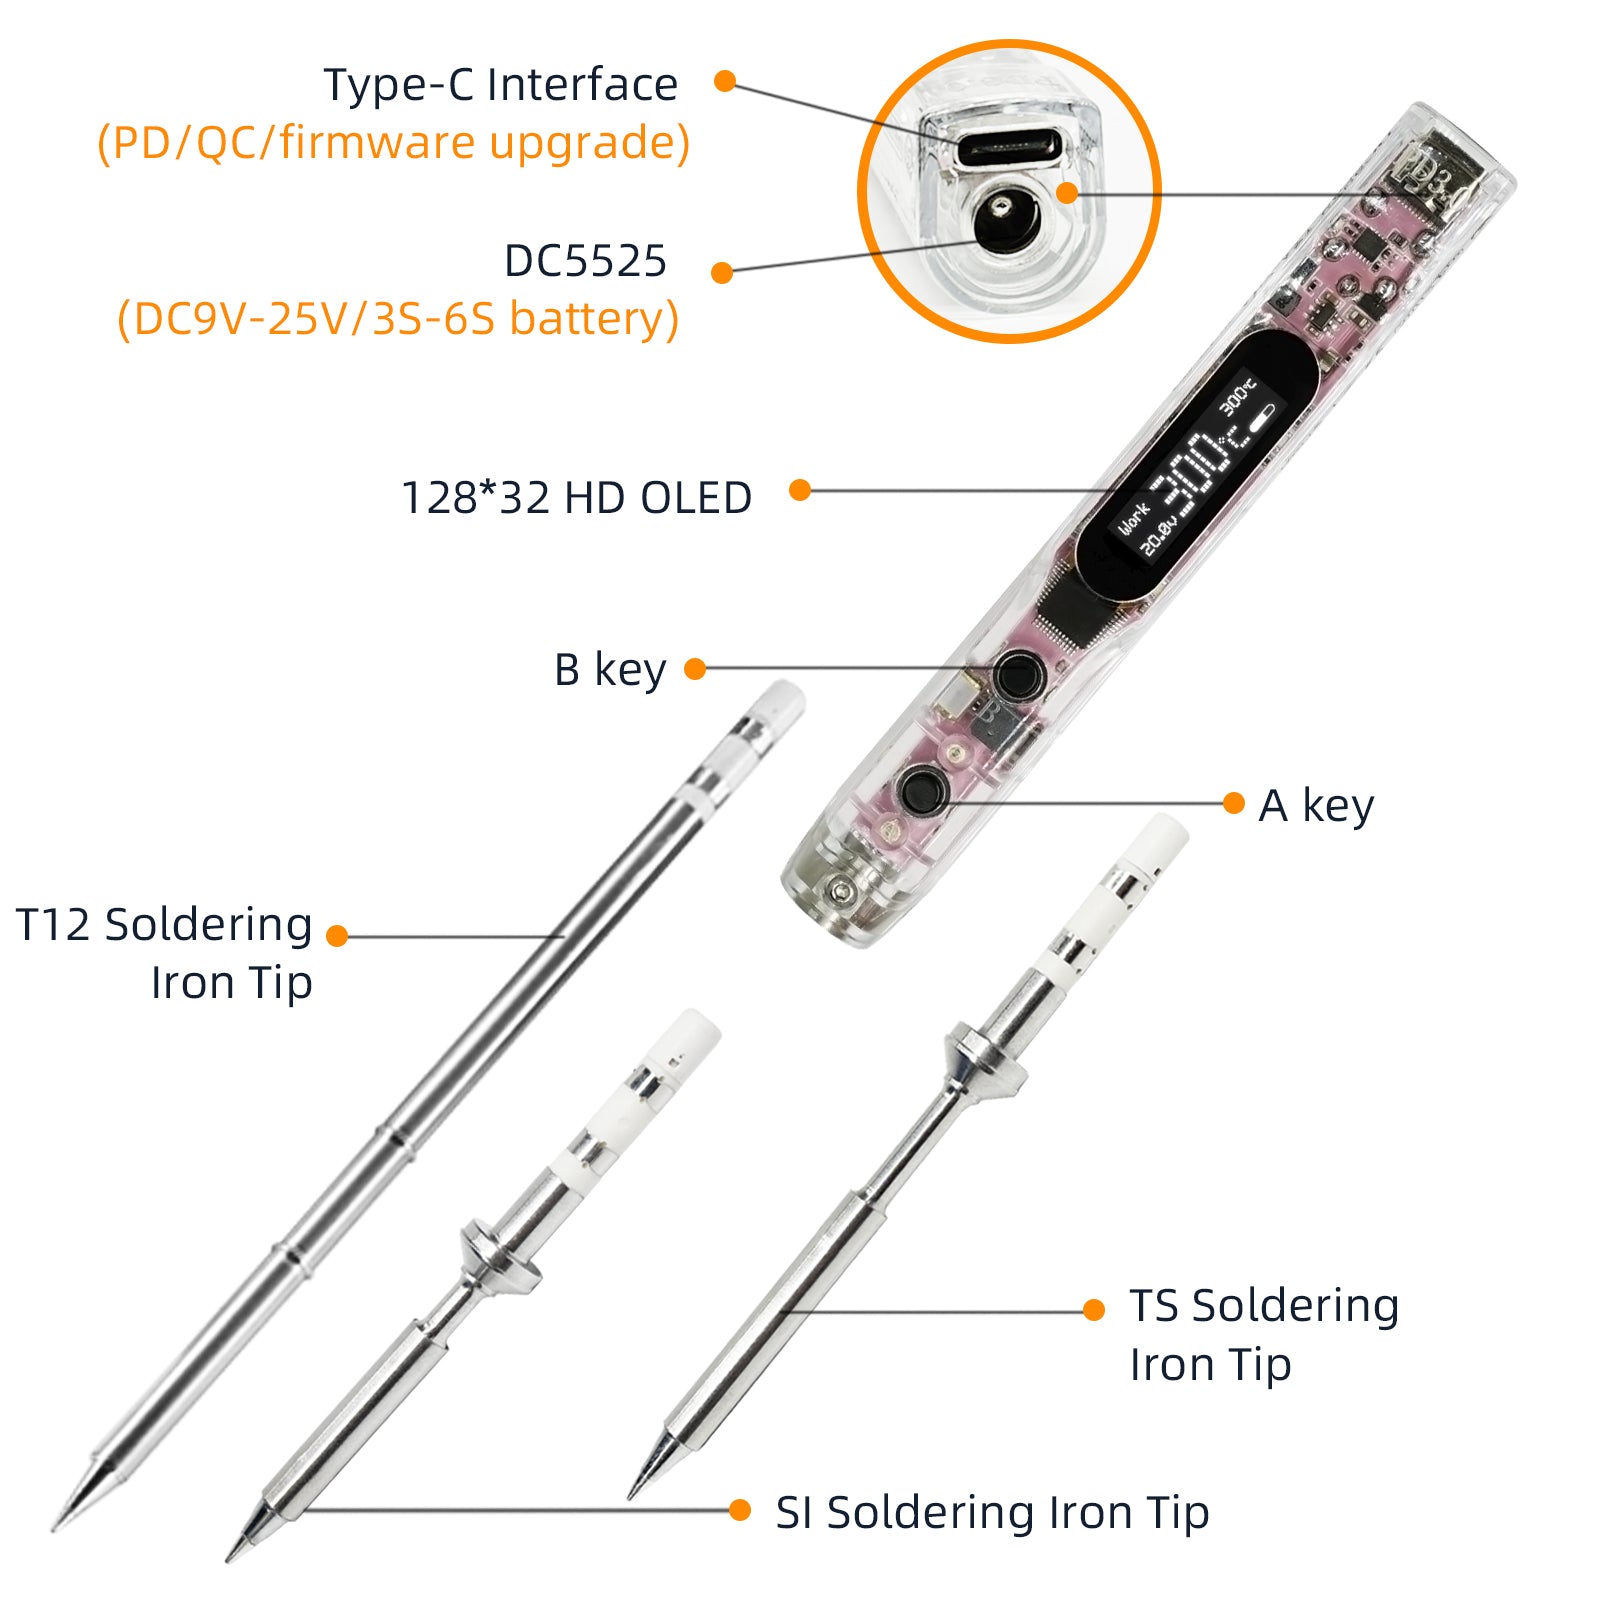 SEQURE SI012 Pro Max Portable OLED Soldering Iron with Color Ambience Light Chinese, English and Russian Menu Applicable T12/TS/SI Soldering Iron Tips Support PD/QC/3S-6S Battery Power Supply